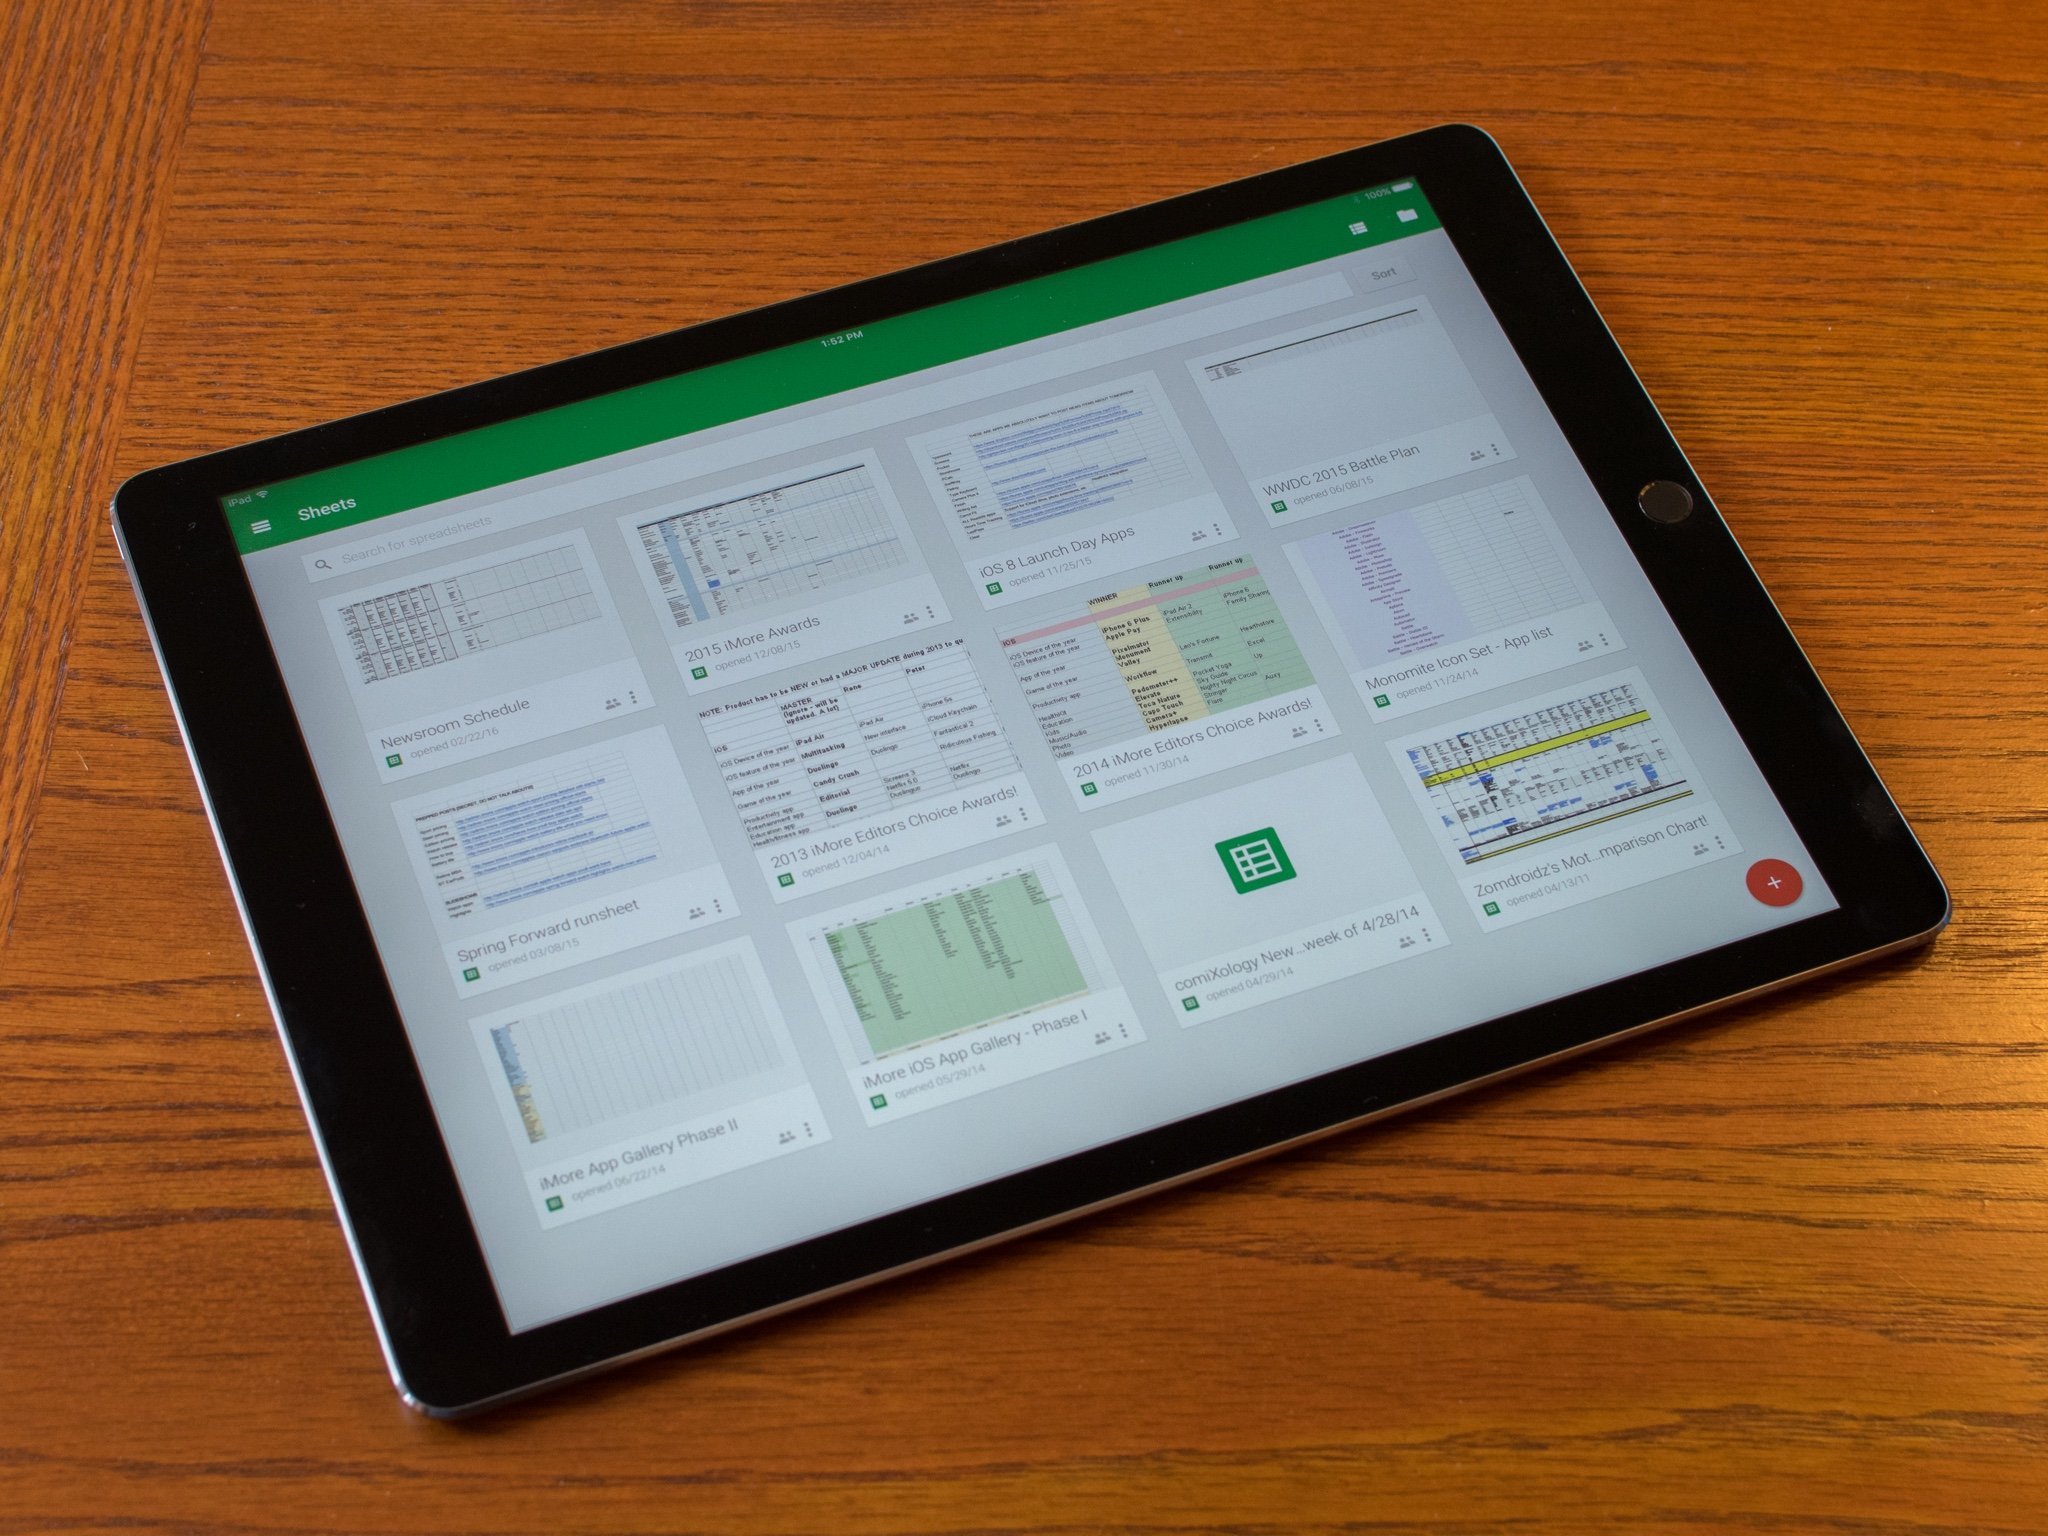 Google Docs and Sheets add iPad Pro support, but still no multitasking